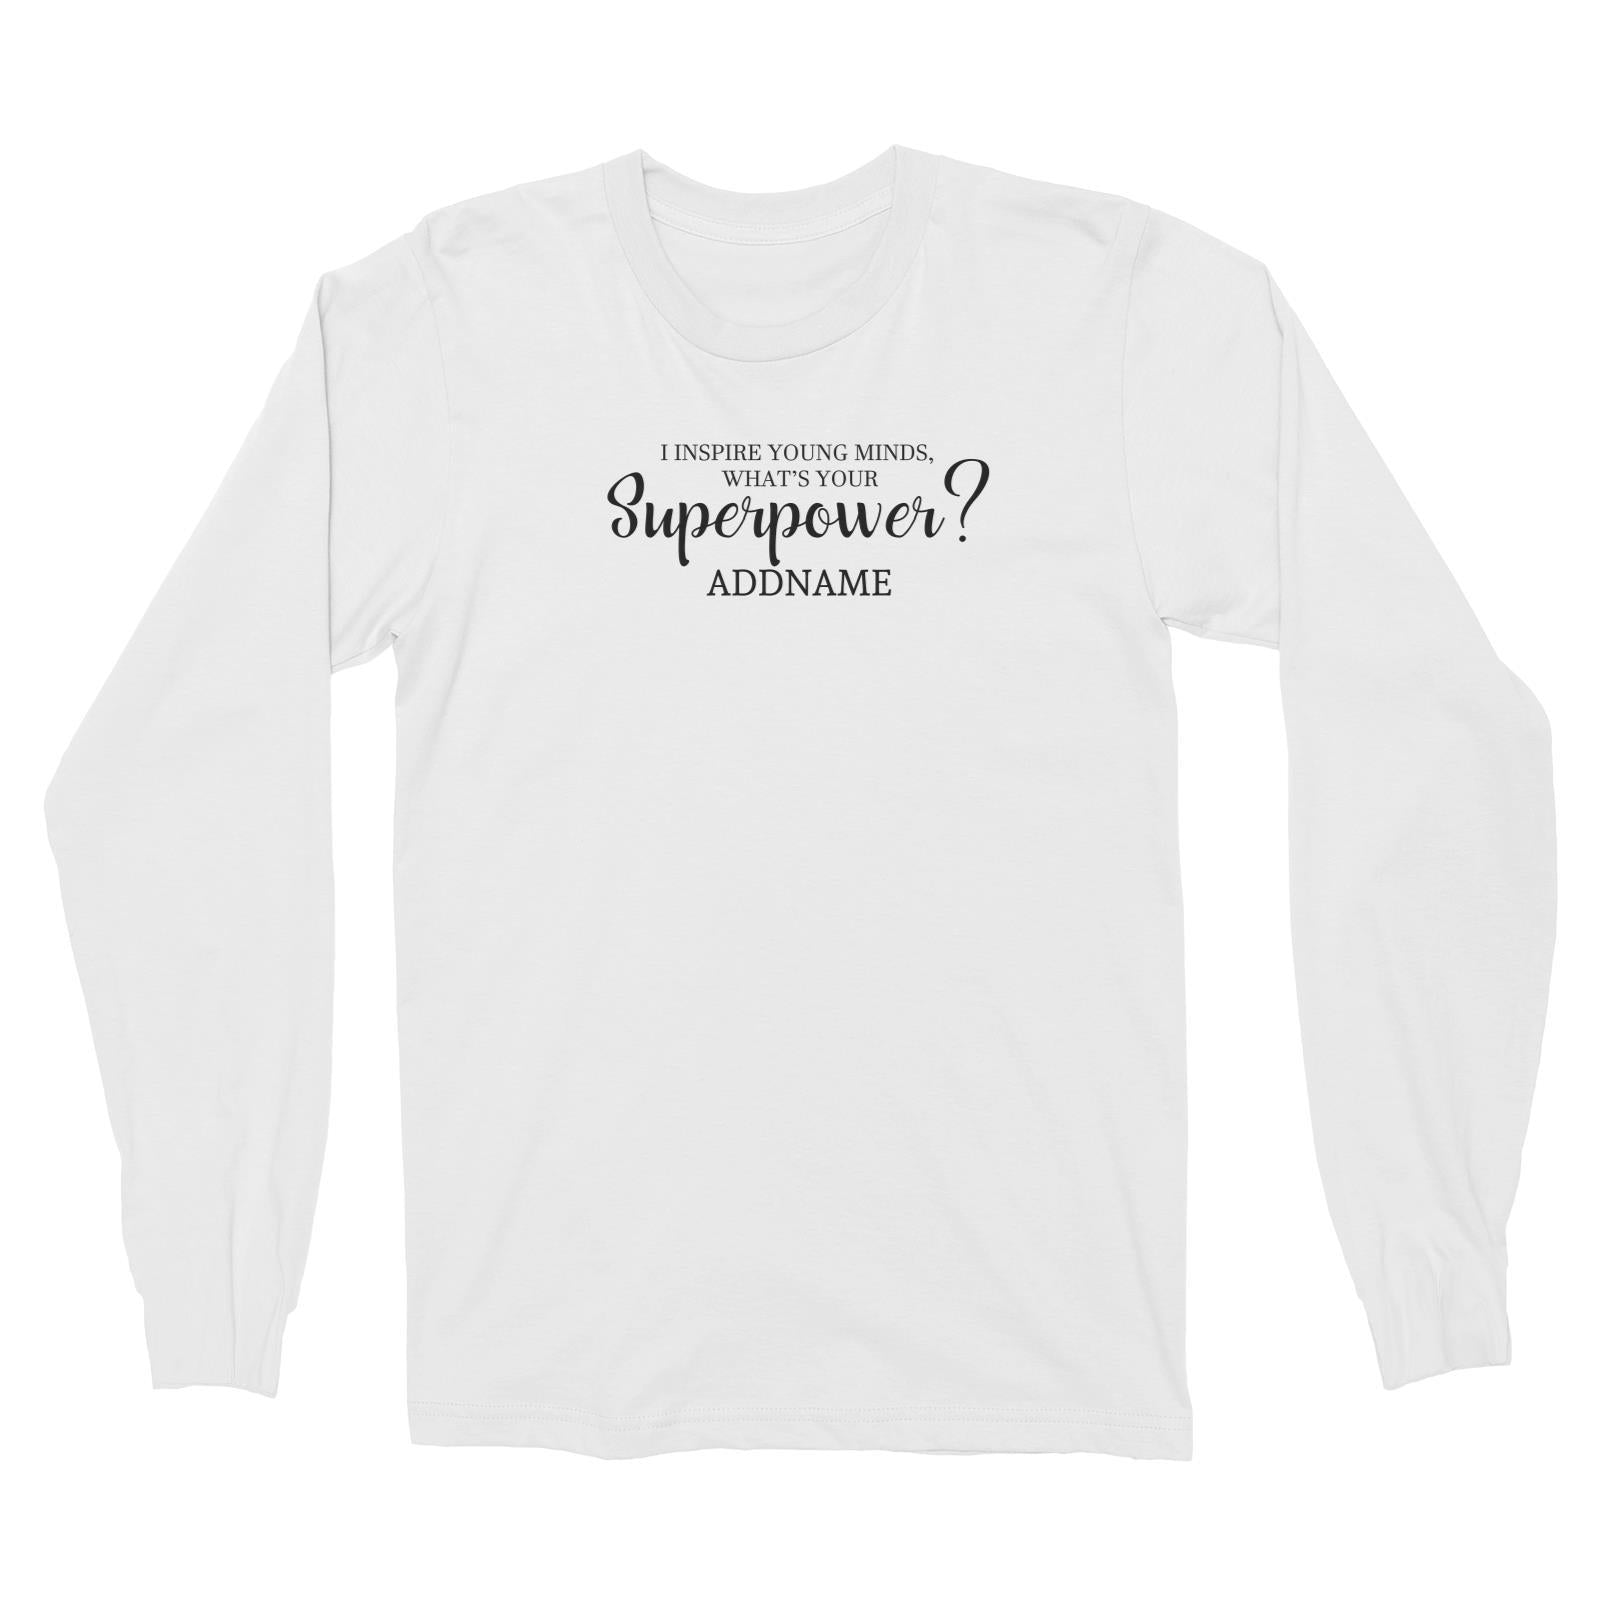 Super Teachers I Inspire Young Minds What's Your Superpower Addname Long Sleeve Unisex T-Shirt